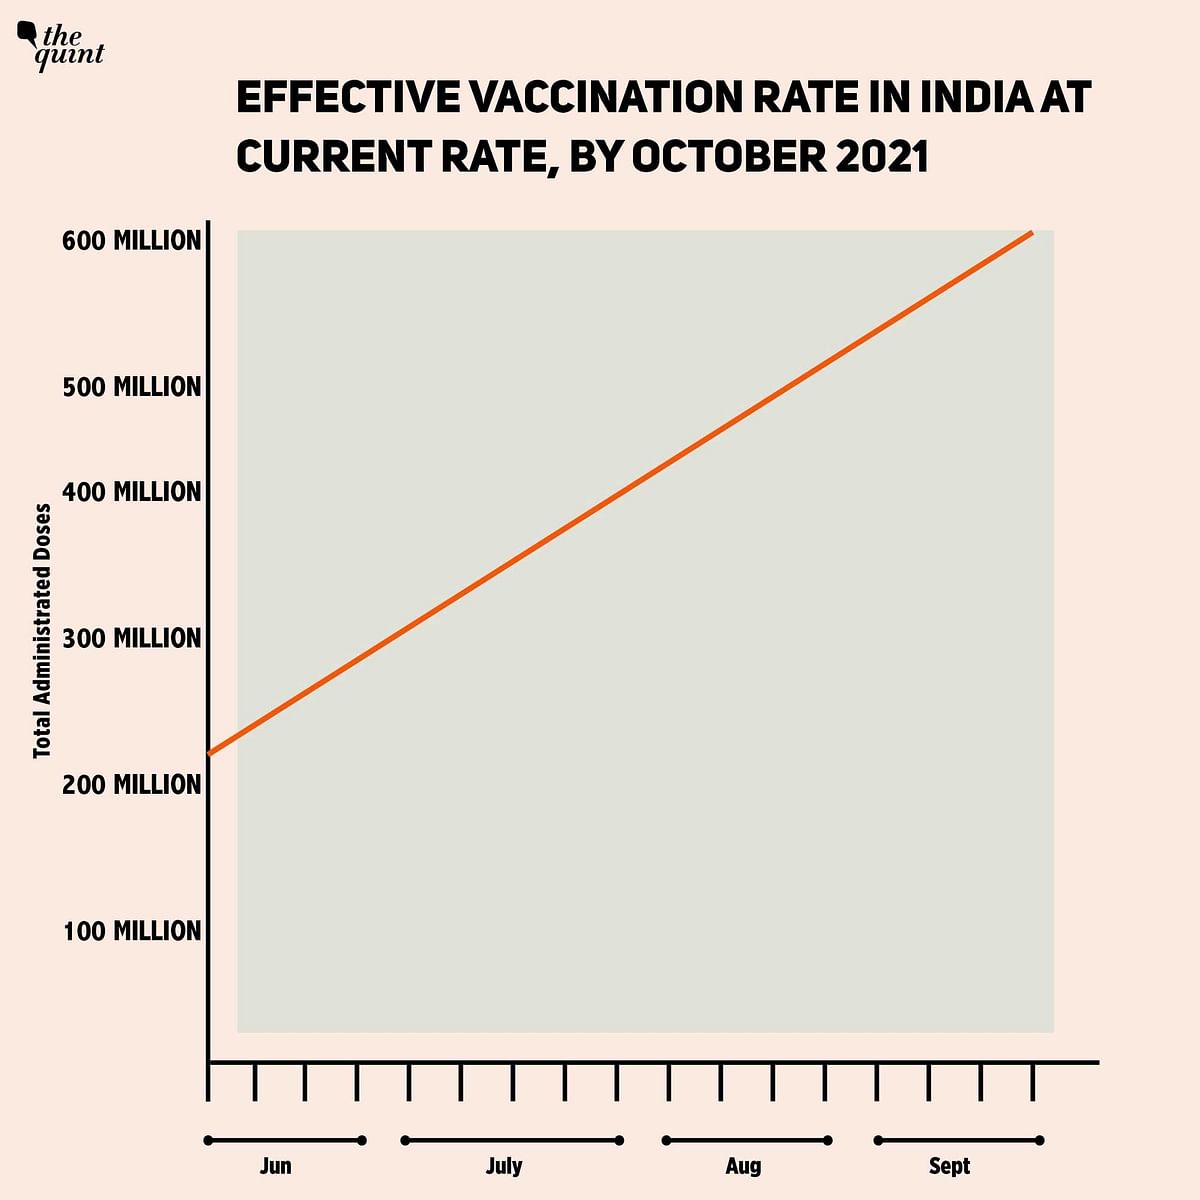 Data shows that COVID vaccination efforts need to be highly ramped up to reach the government’s ambitious target.